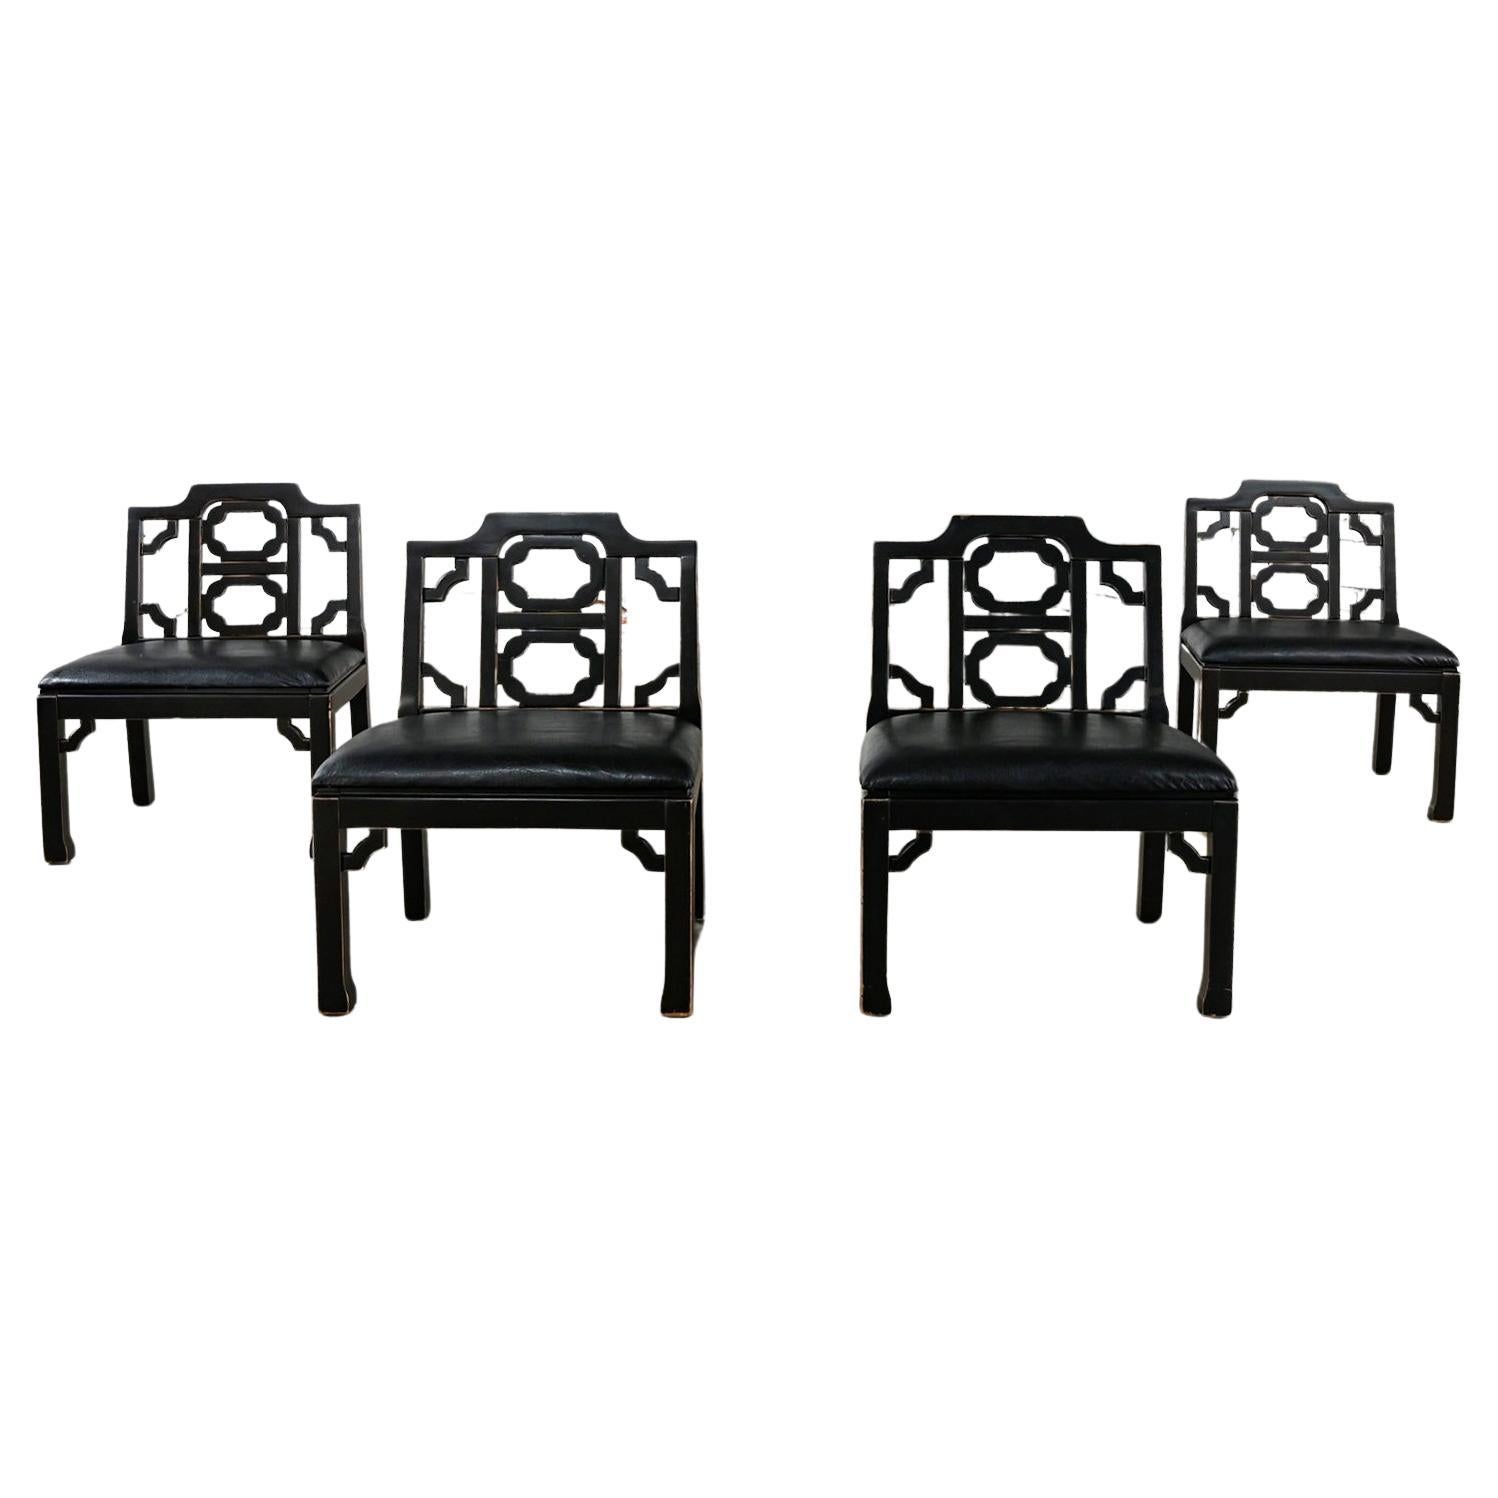 4 Hollywood Regency Chinese Chippendale Style Black Accent Chairs by Thomasville For Sale